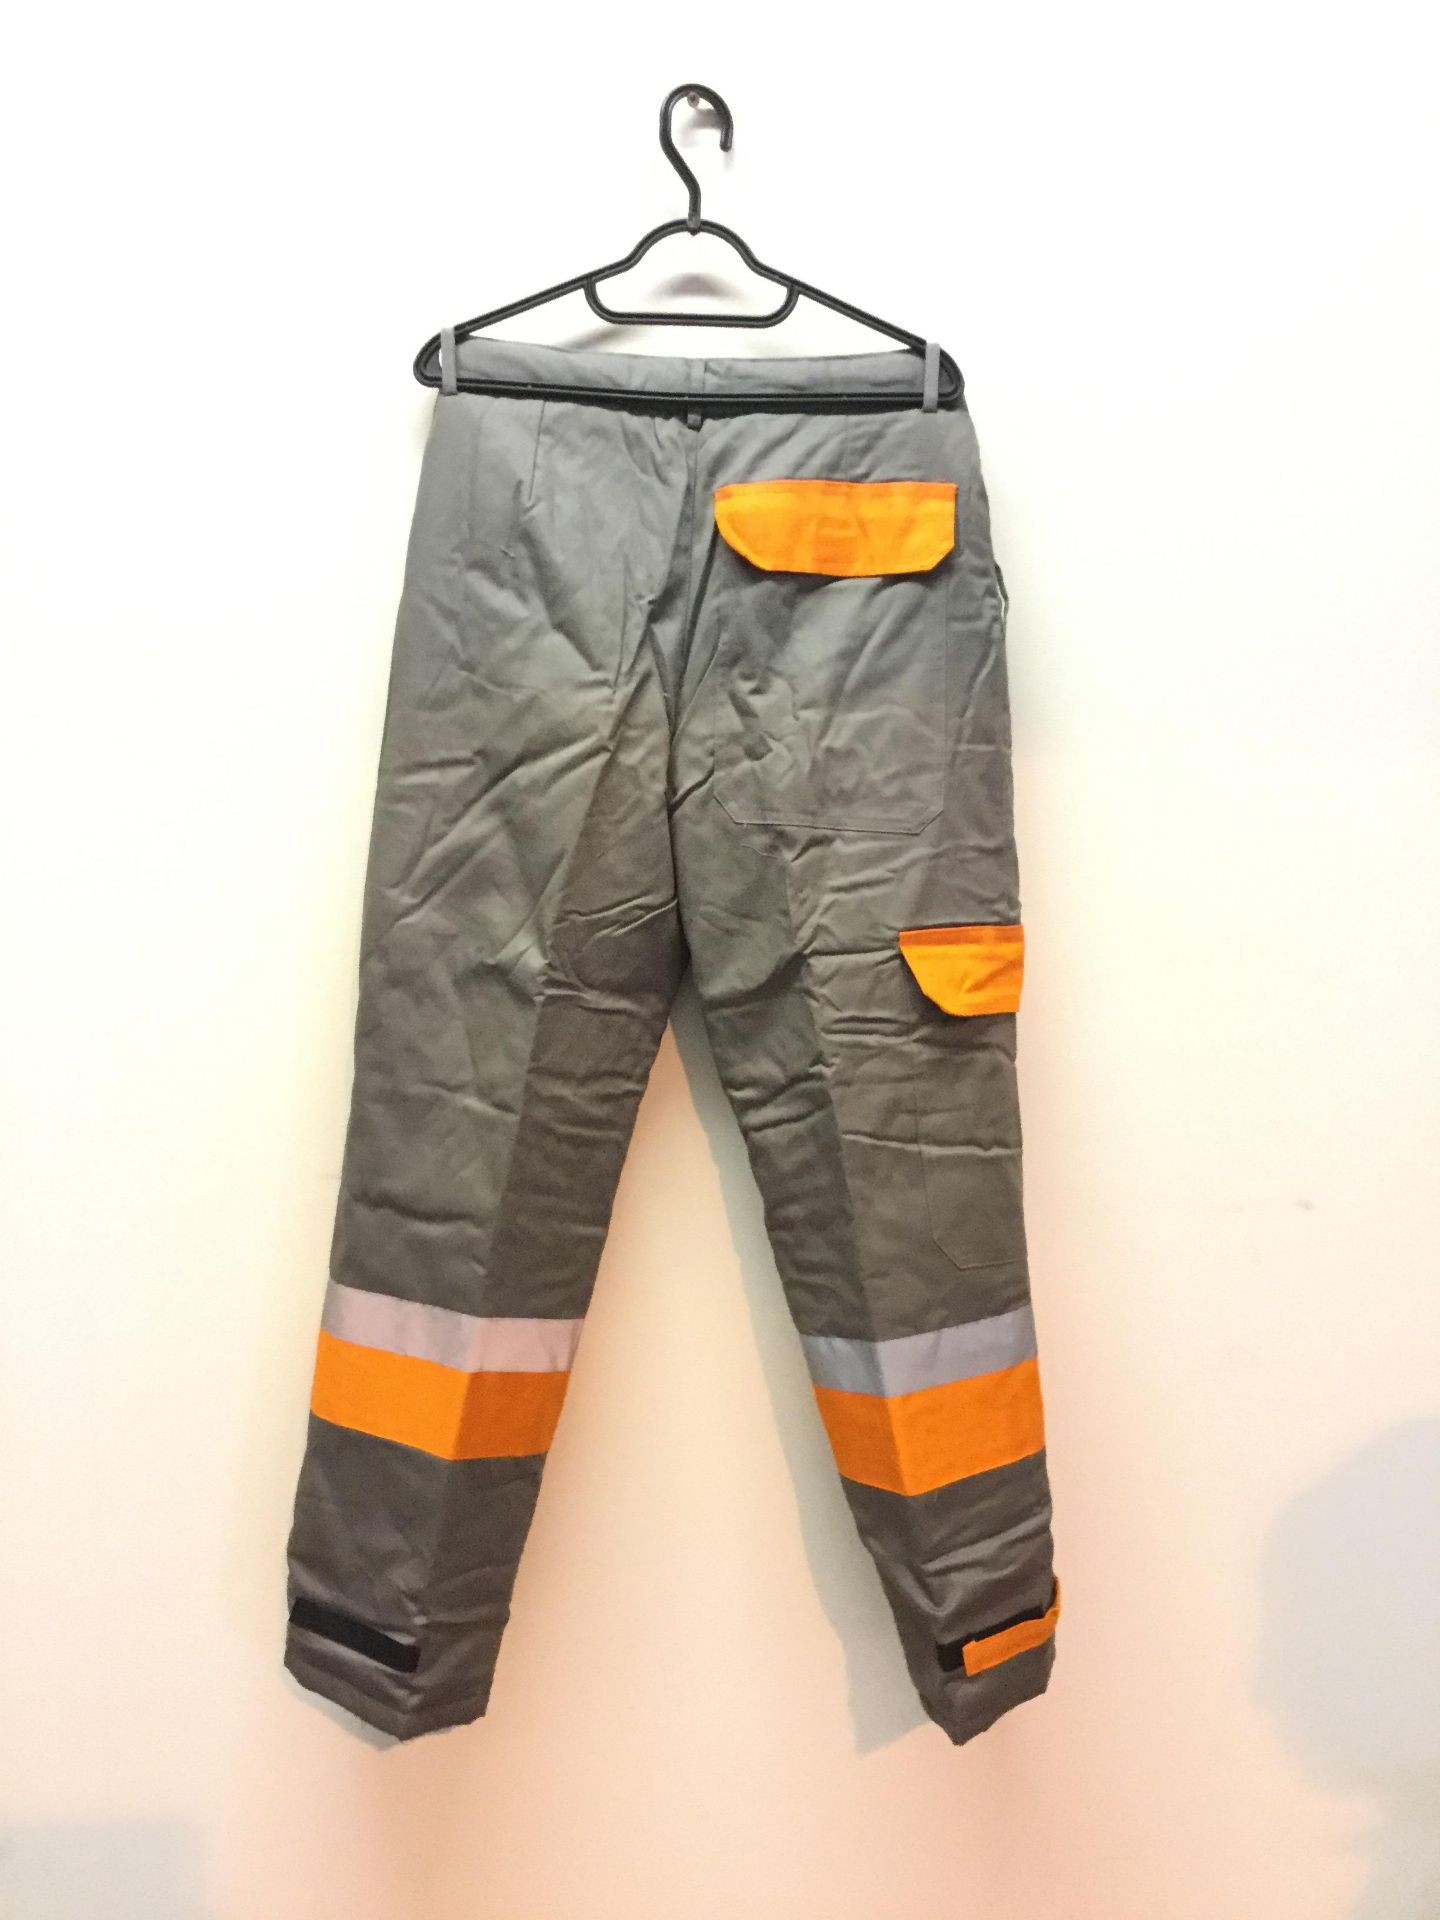 Flame Retardant Winter Trousers - Size 48 - Image 2 of 2